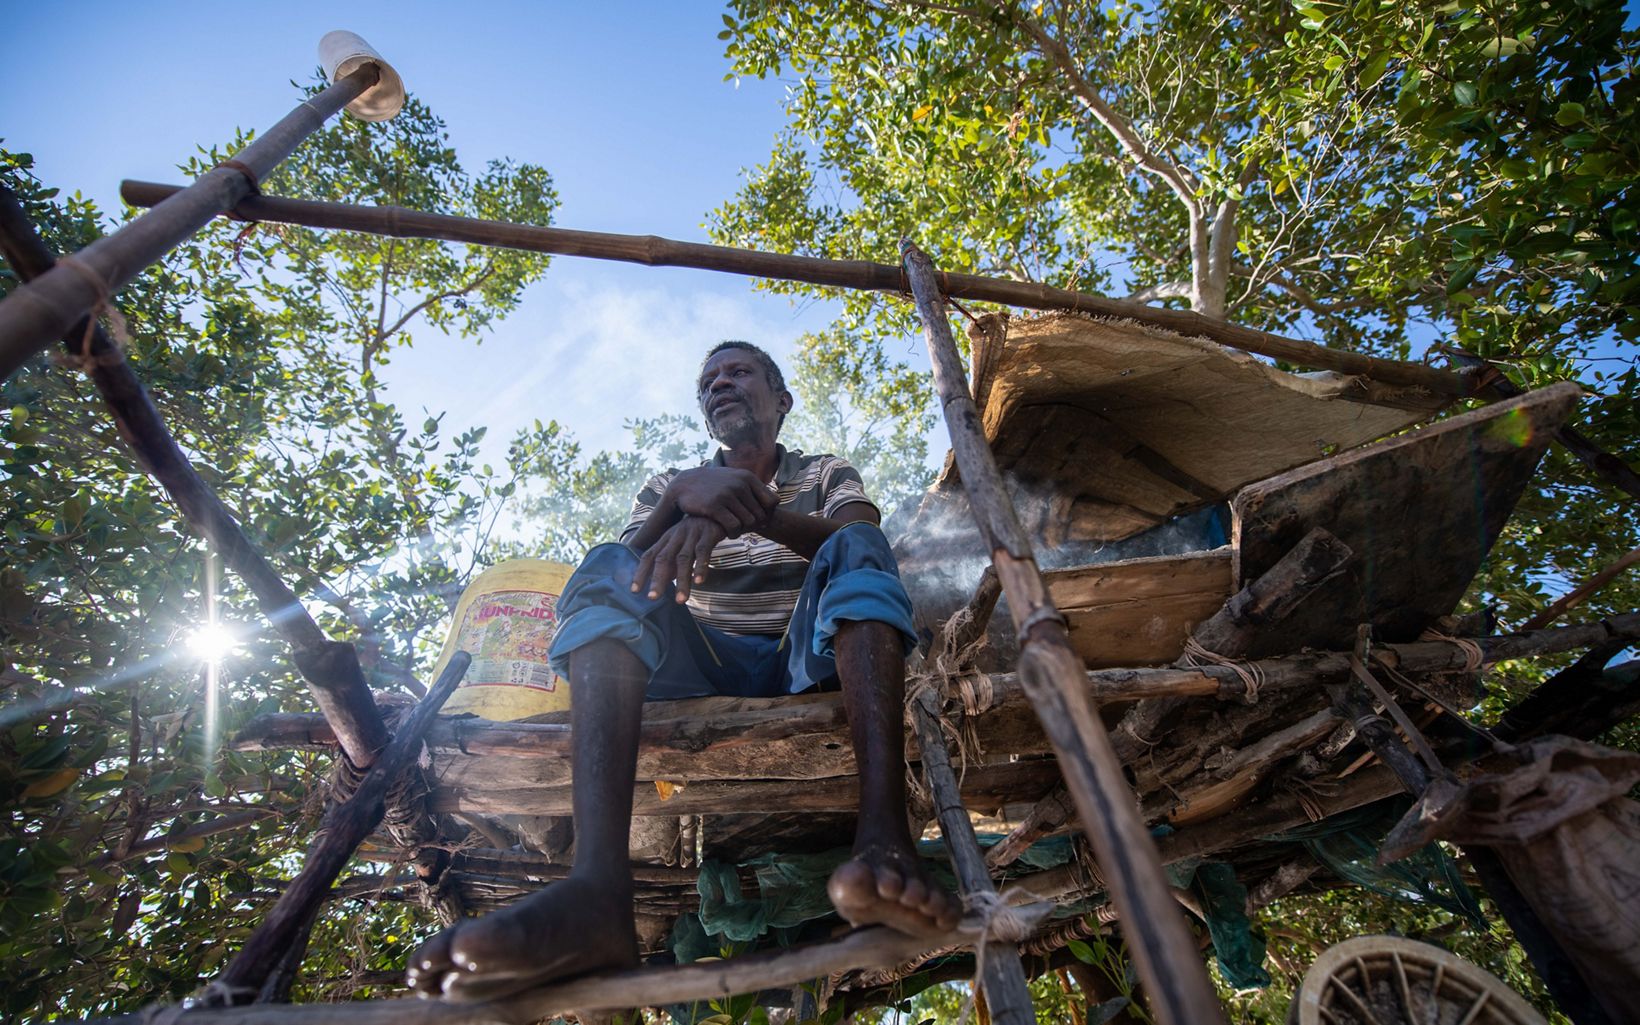 A man sits in an elevated wooden stand with mangrove forests behind him